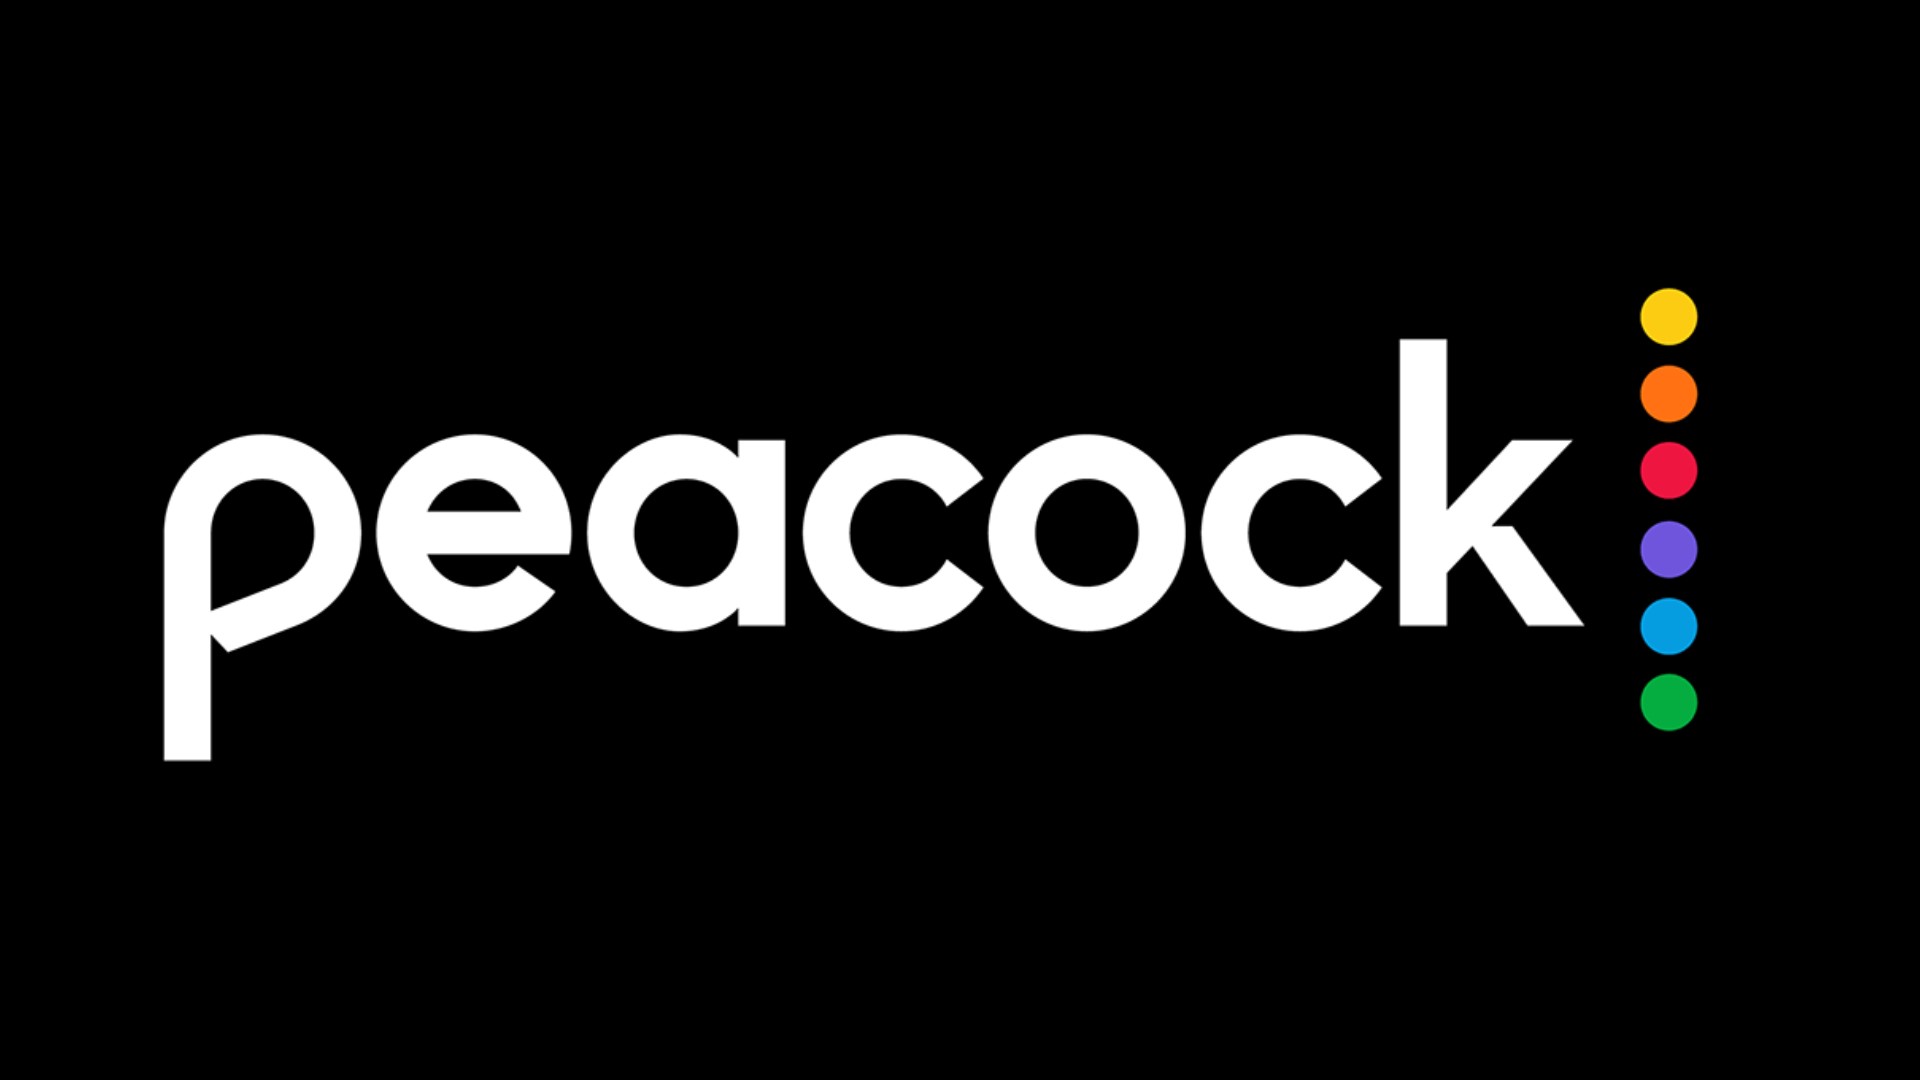 Peacock logo large - Does Peacock have live TV